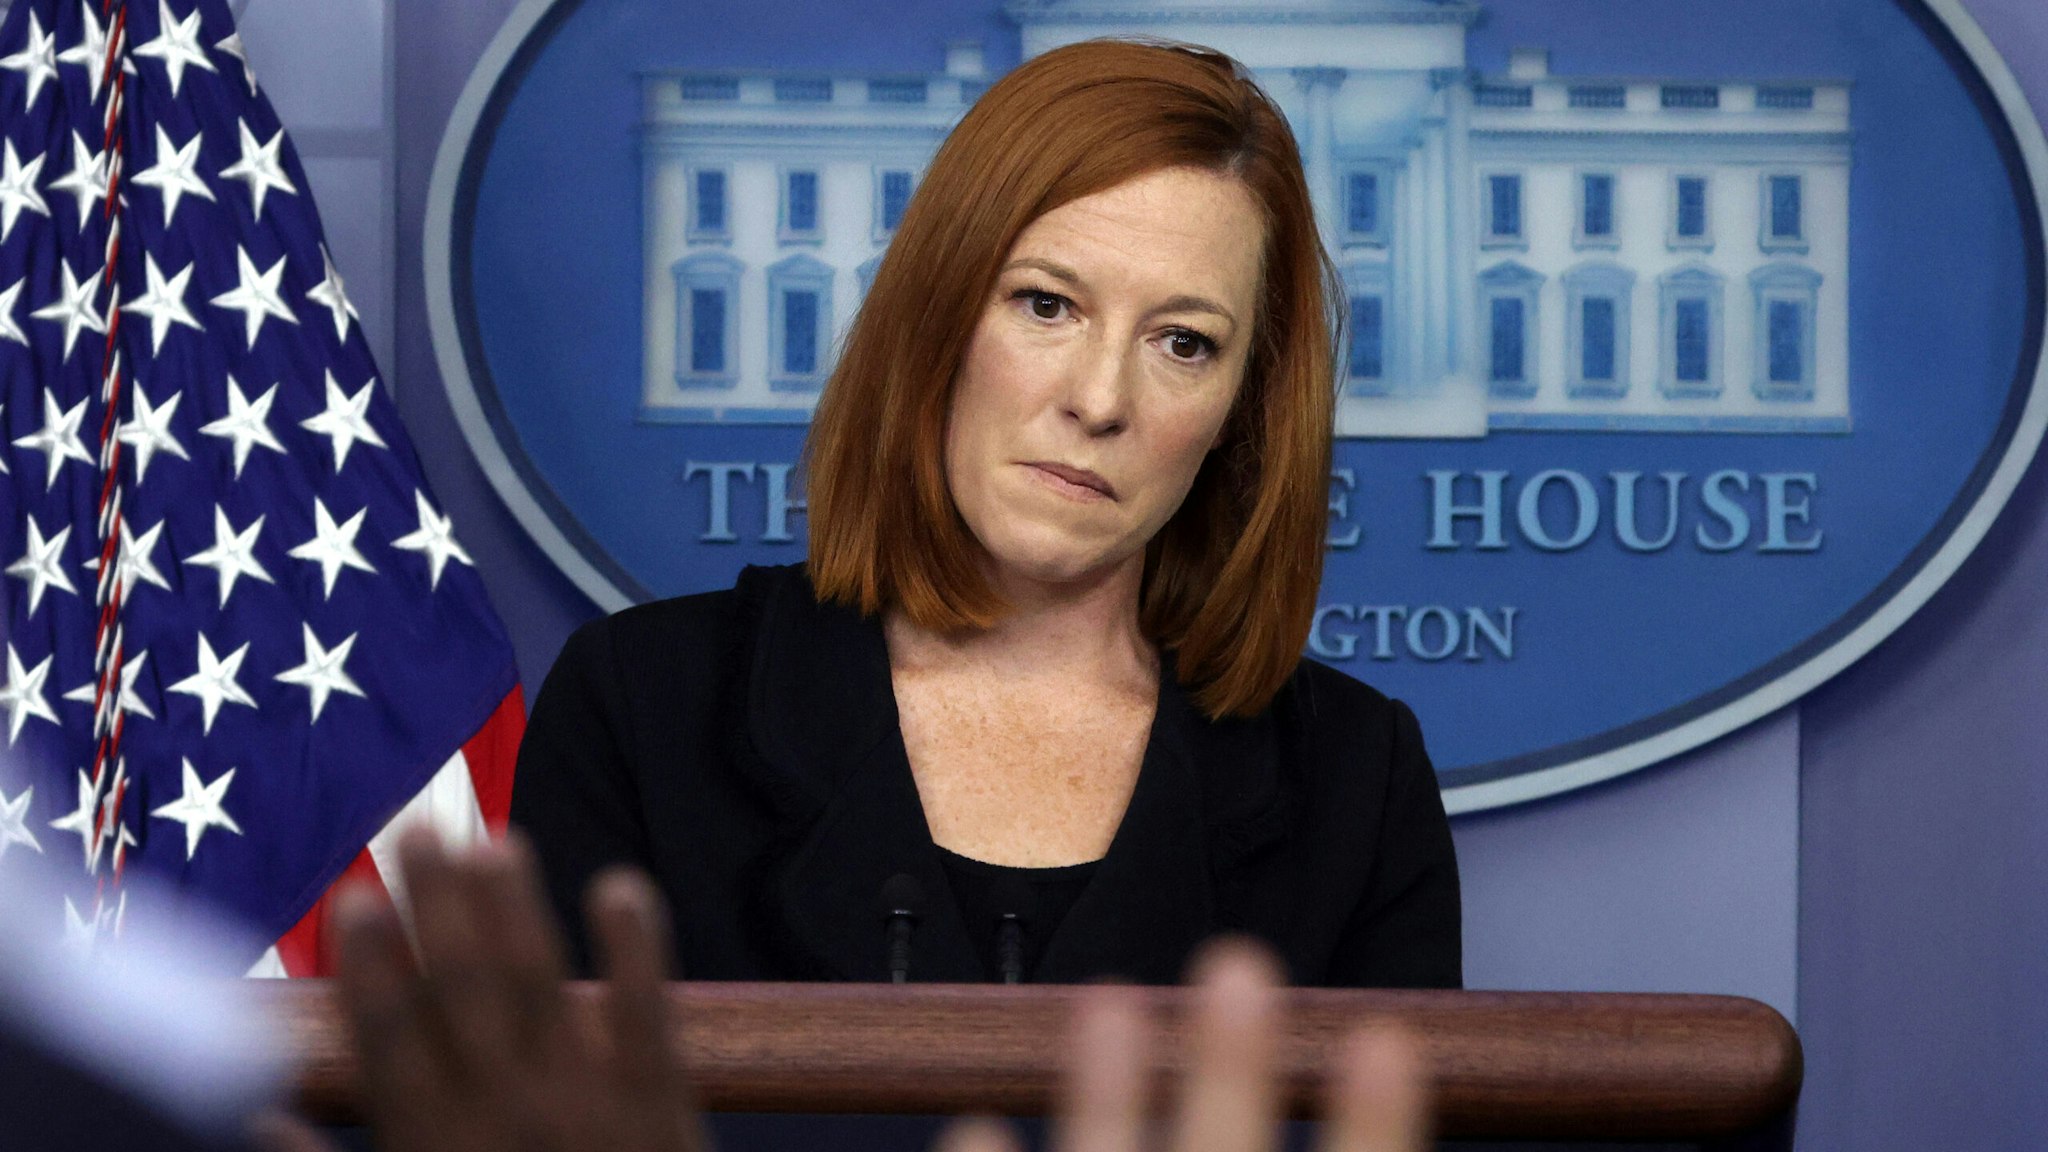 WASHINGTON, DC - SEPTEMBER 20: White House Press Secretary Jen Psaki takes questions during the daily press briefing in the James S. Brady Press Briefing Room at the White House September 20, 2021 in Washington, DC. Psaki held the briefing to answer questions from members of the White House press corps.